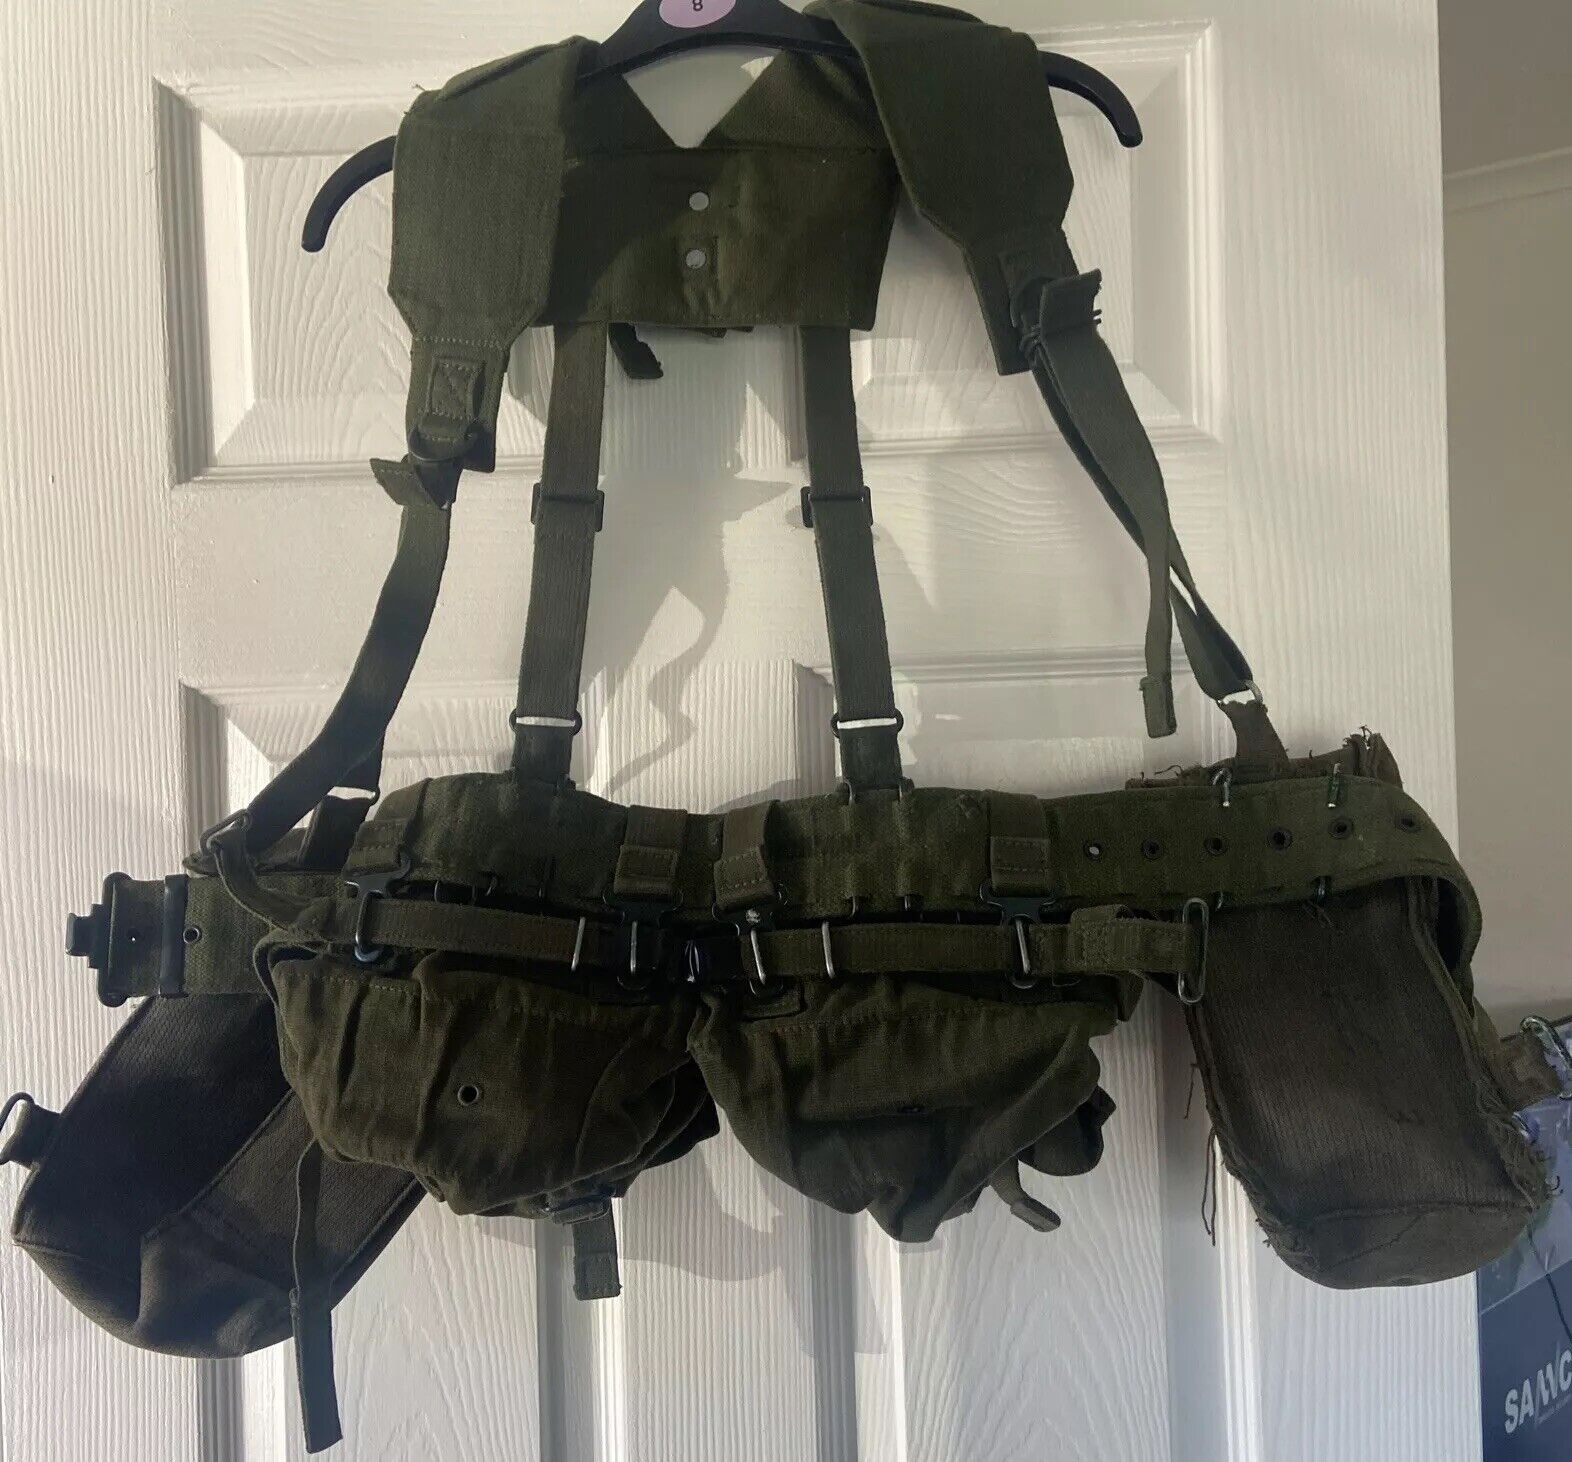 VINTAGE JOB LOT Great Britain Military Surplus Harness And Gear Pattern Ponchos